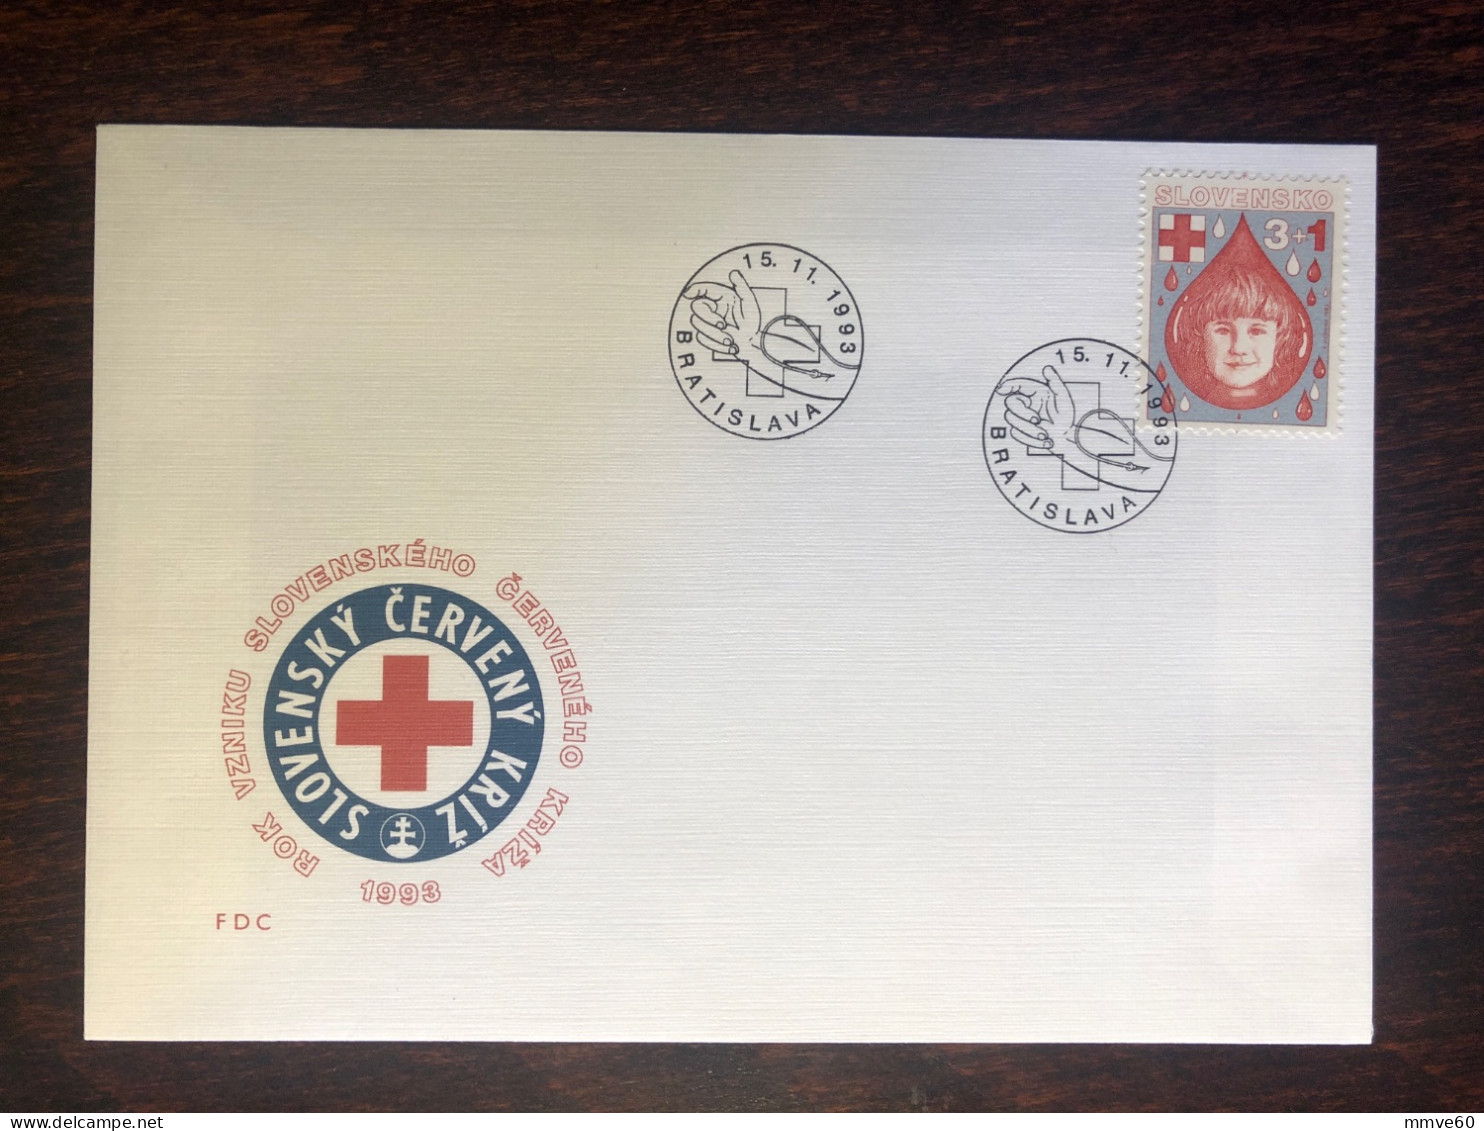 SLOVAKIA FDC COVER 1993 YEAR BLOOD DONATION RED CROSS HEALTH MEDICINE STAMPS - FDC